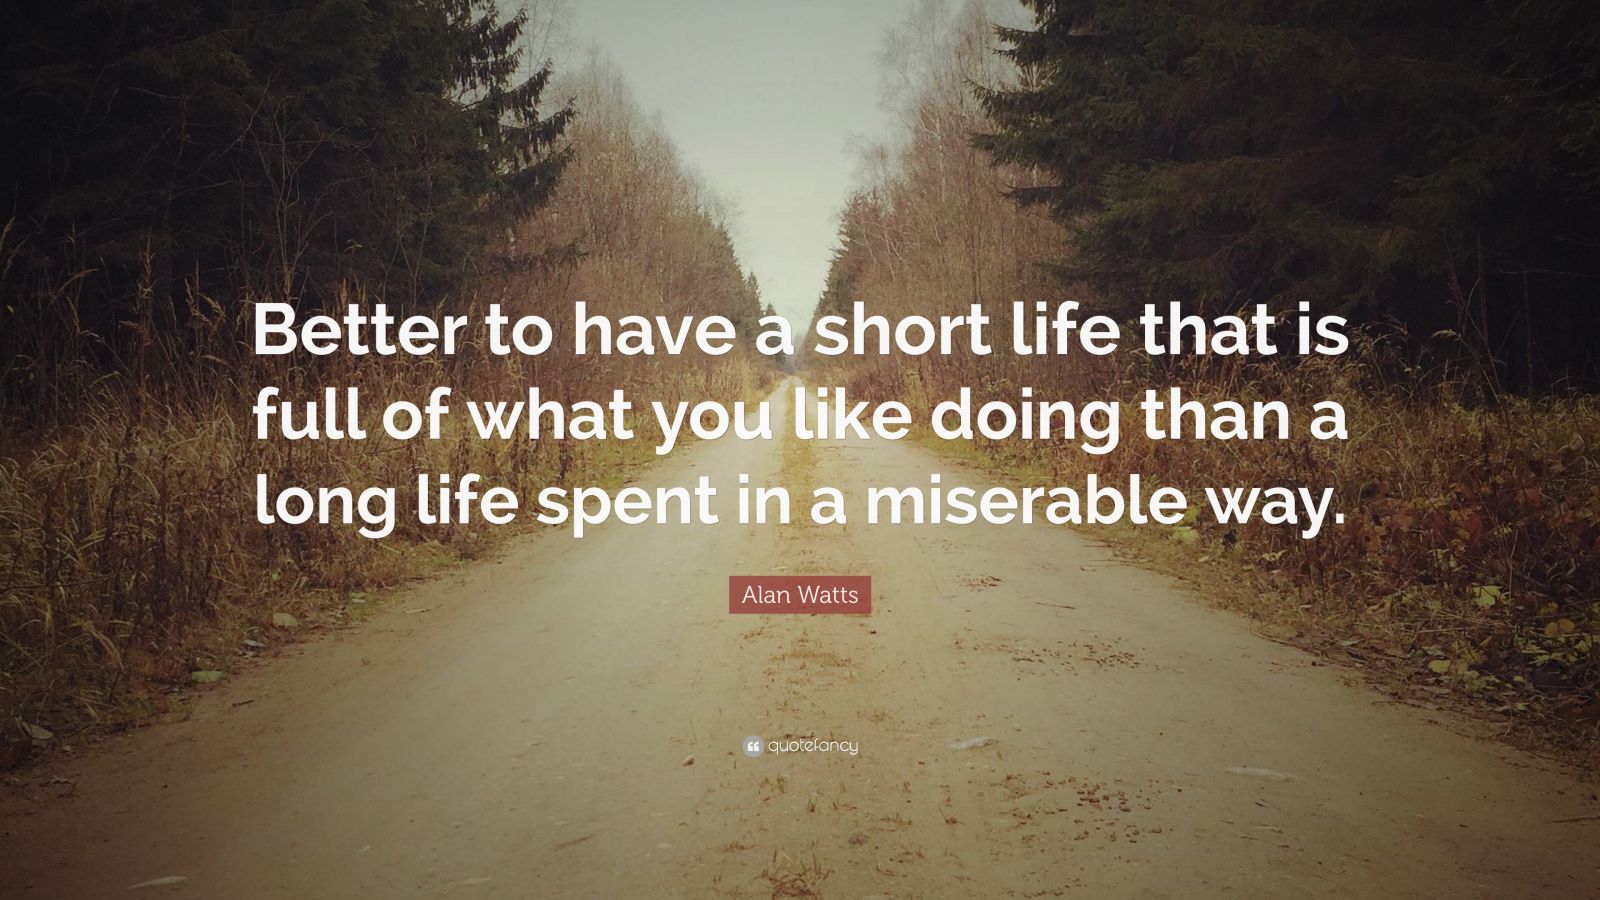 Alan Watts Quote: “Better to have a short life that is full of what you ...